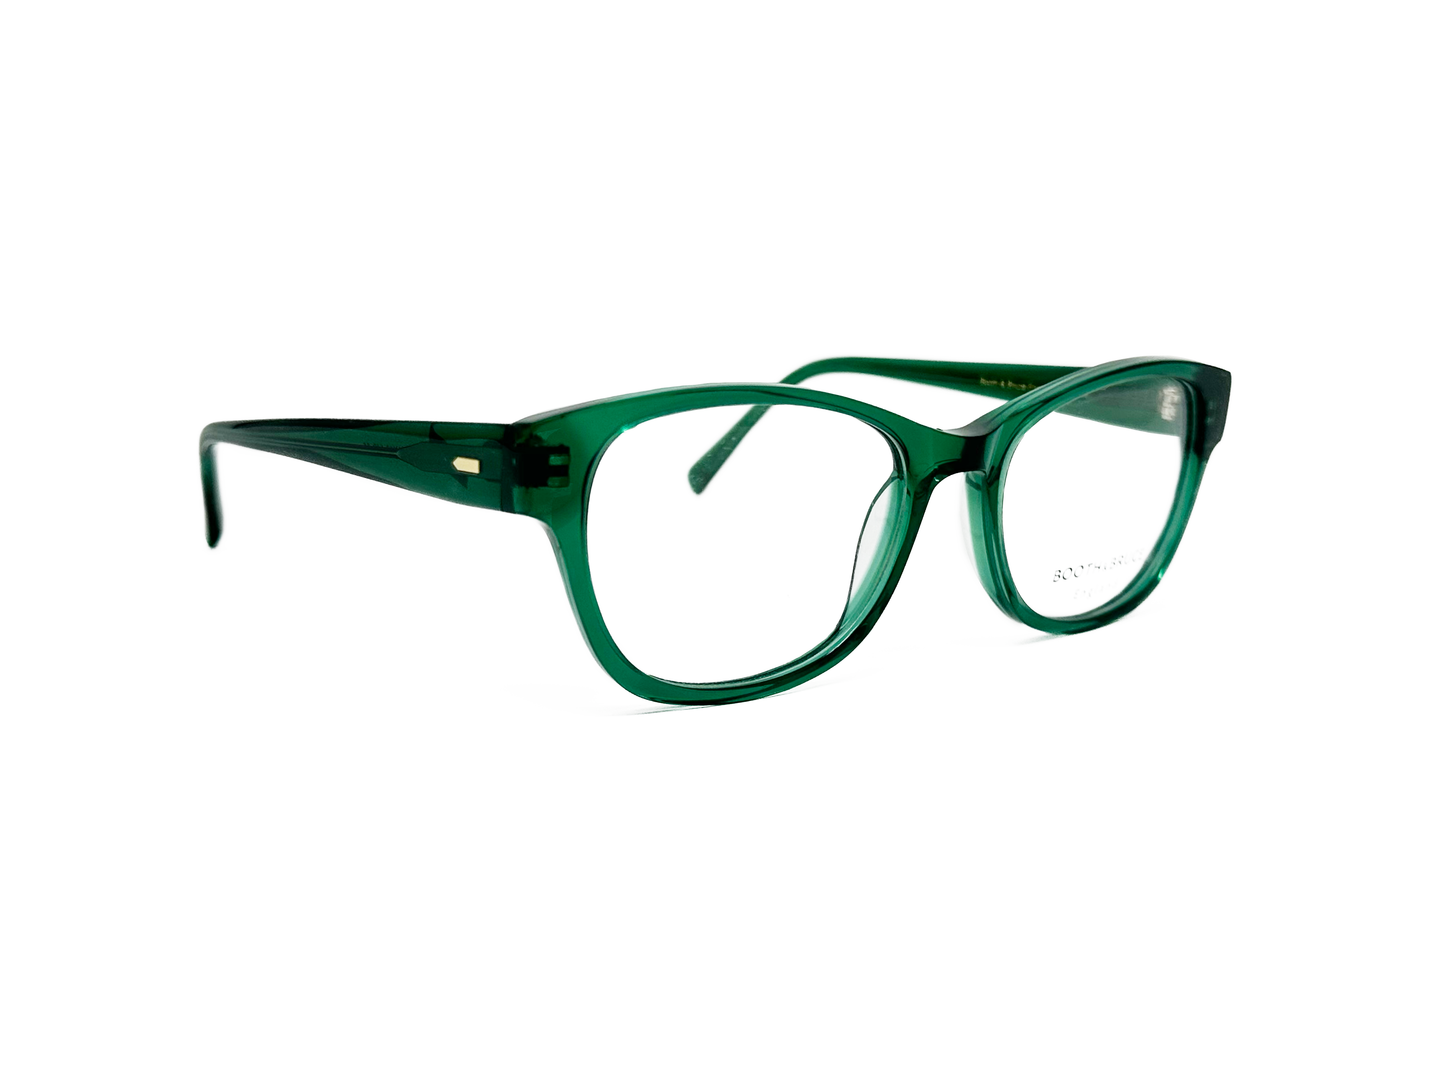 Booth and Bruce rounded-rectangular, acetate optical frame. Model: BB2203. Color: Jade - Semi-transparent forest green. Side view.